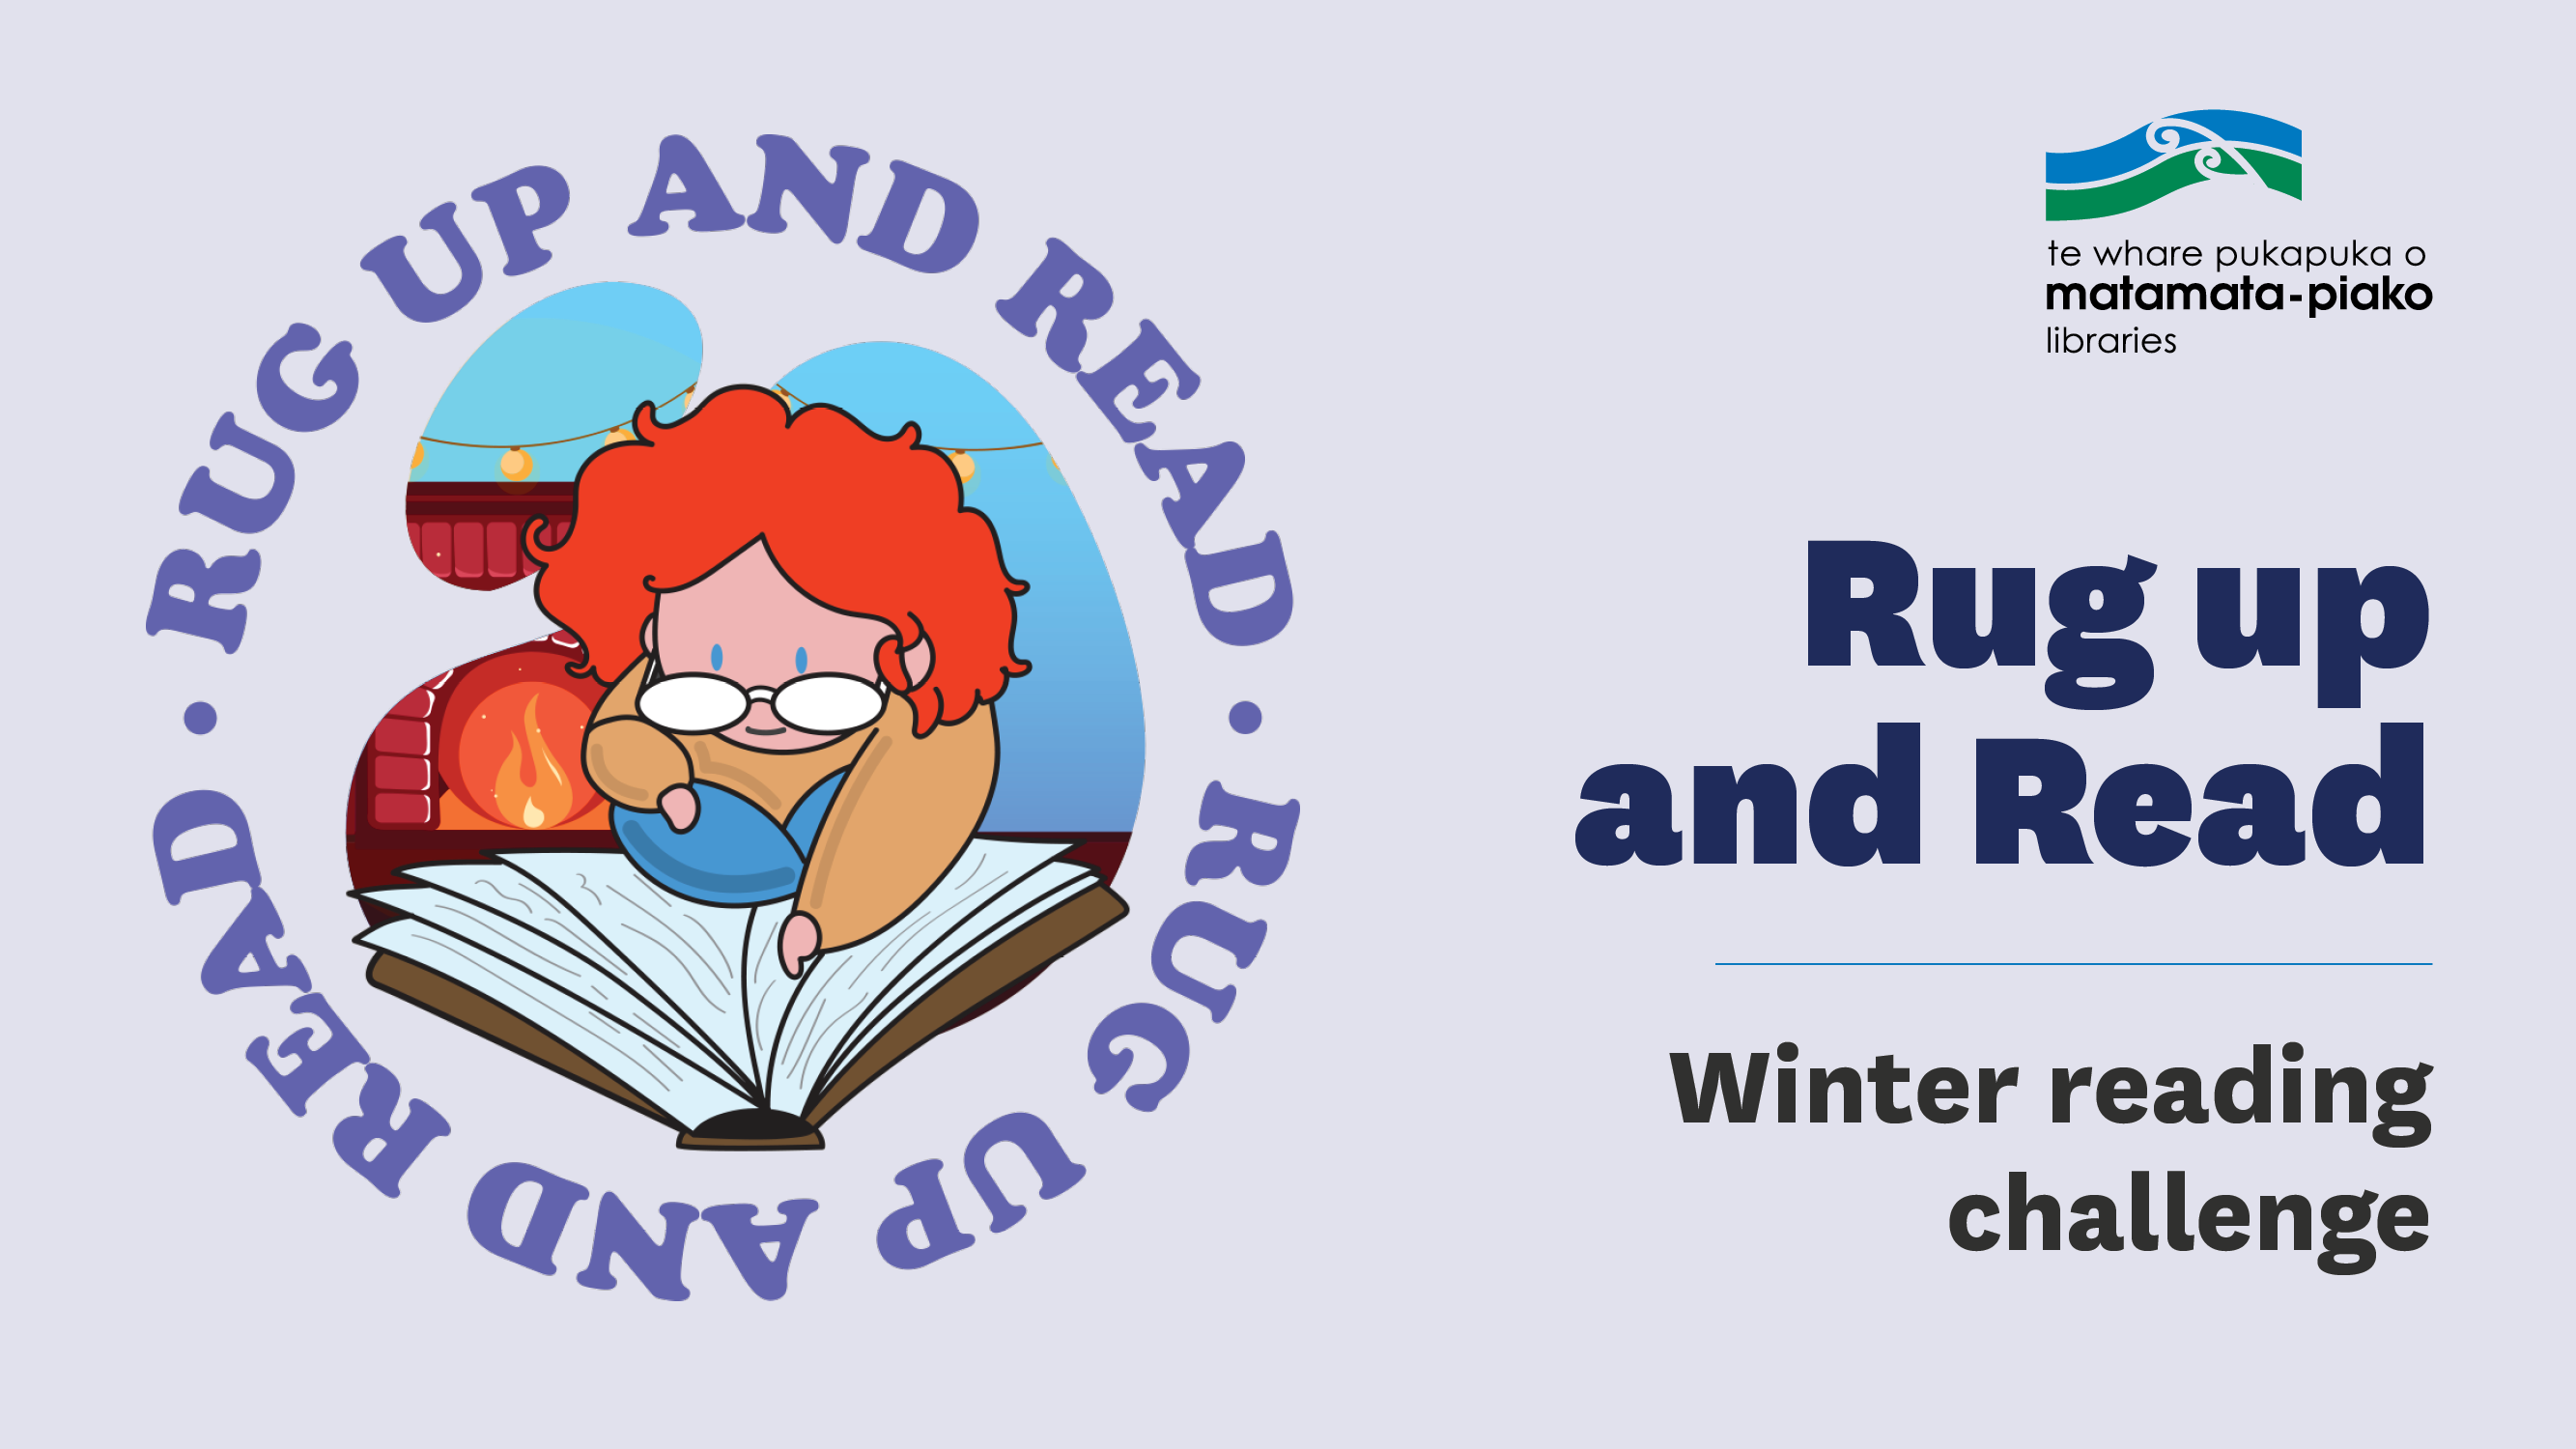 Rug up and Read this winter